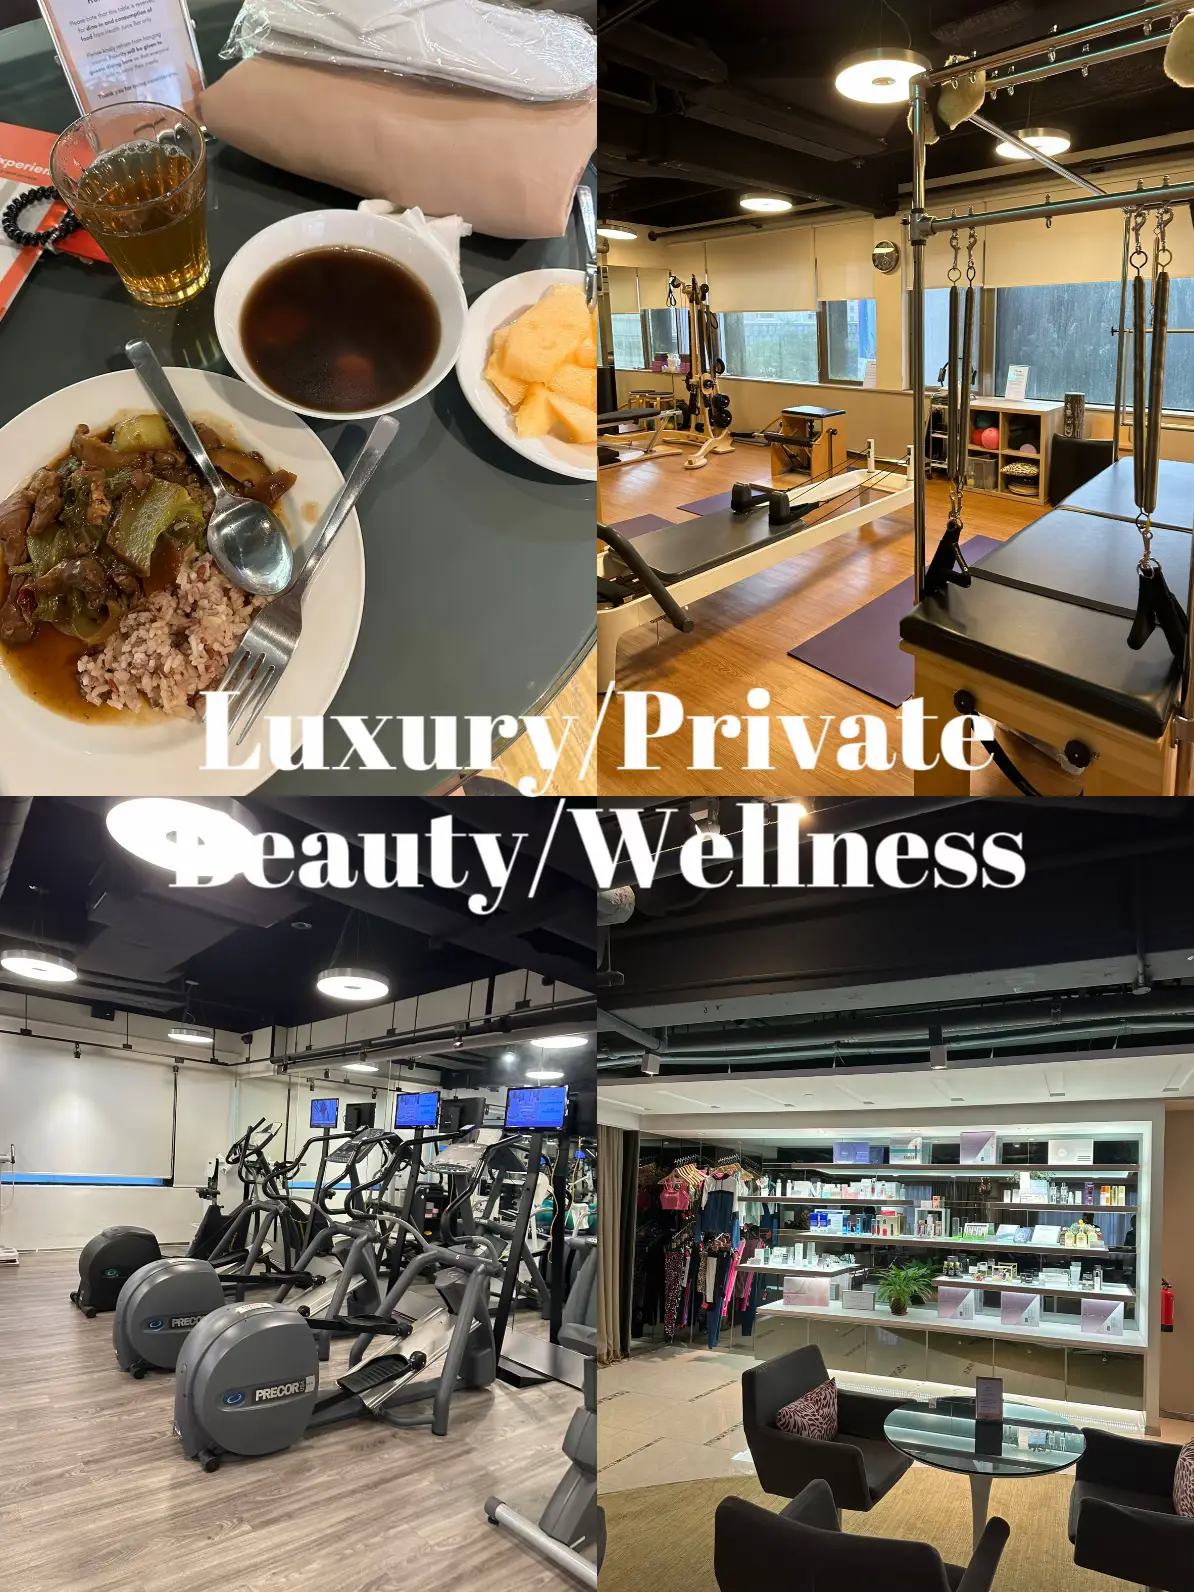 Luxury ALL-WOMEN’S beauty & wellness club 💵 's images(0)